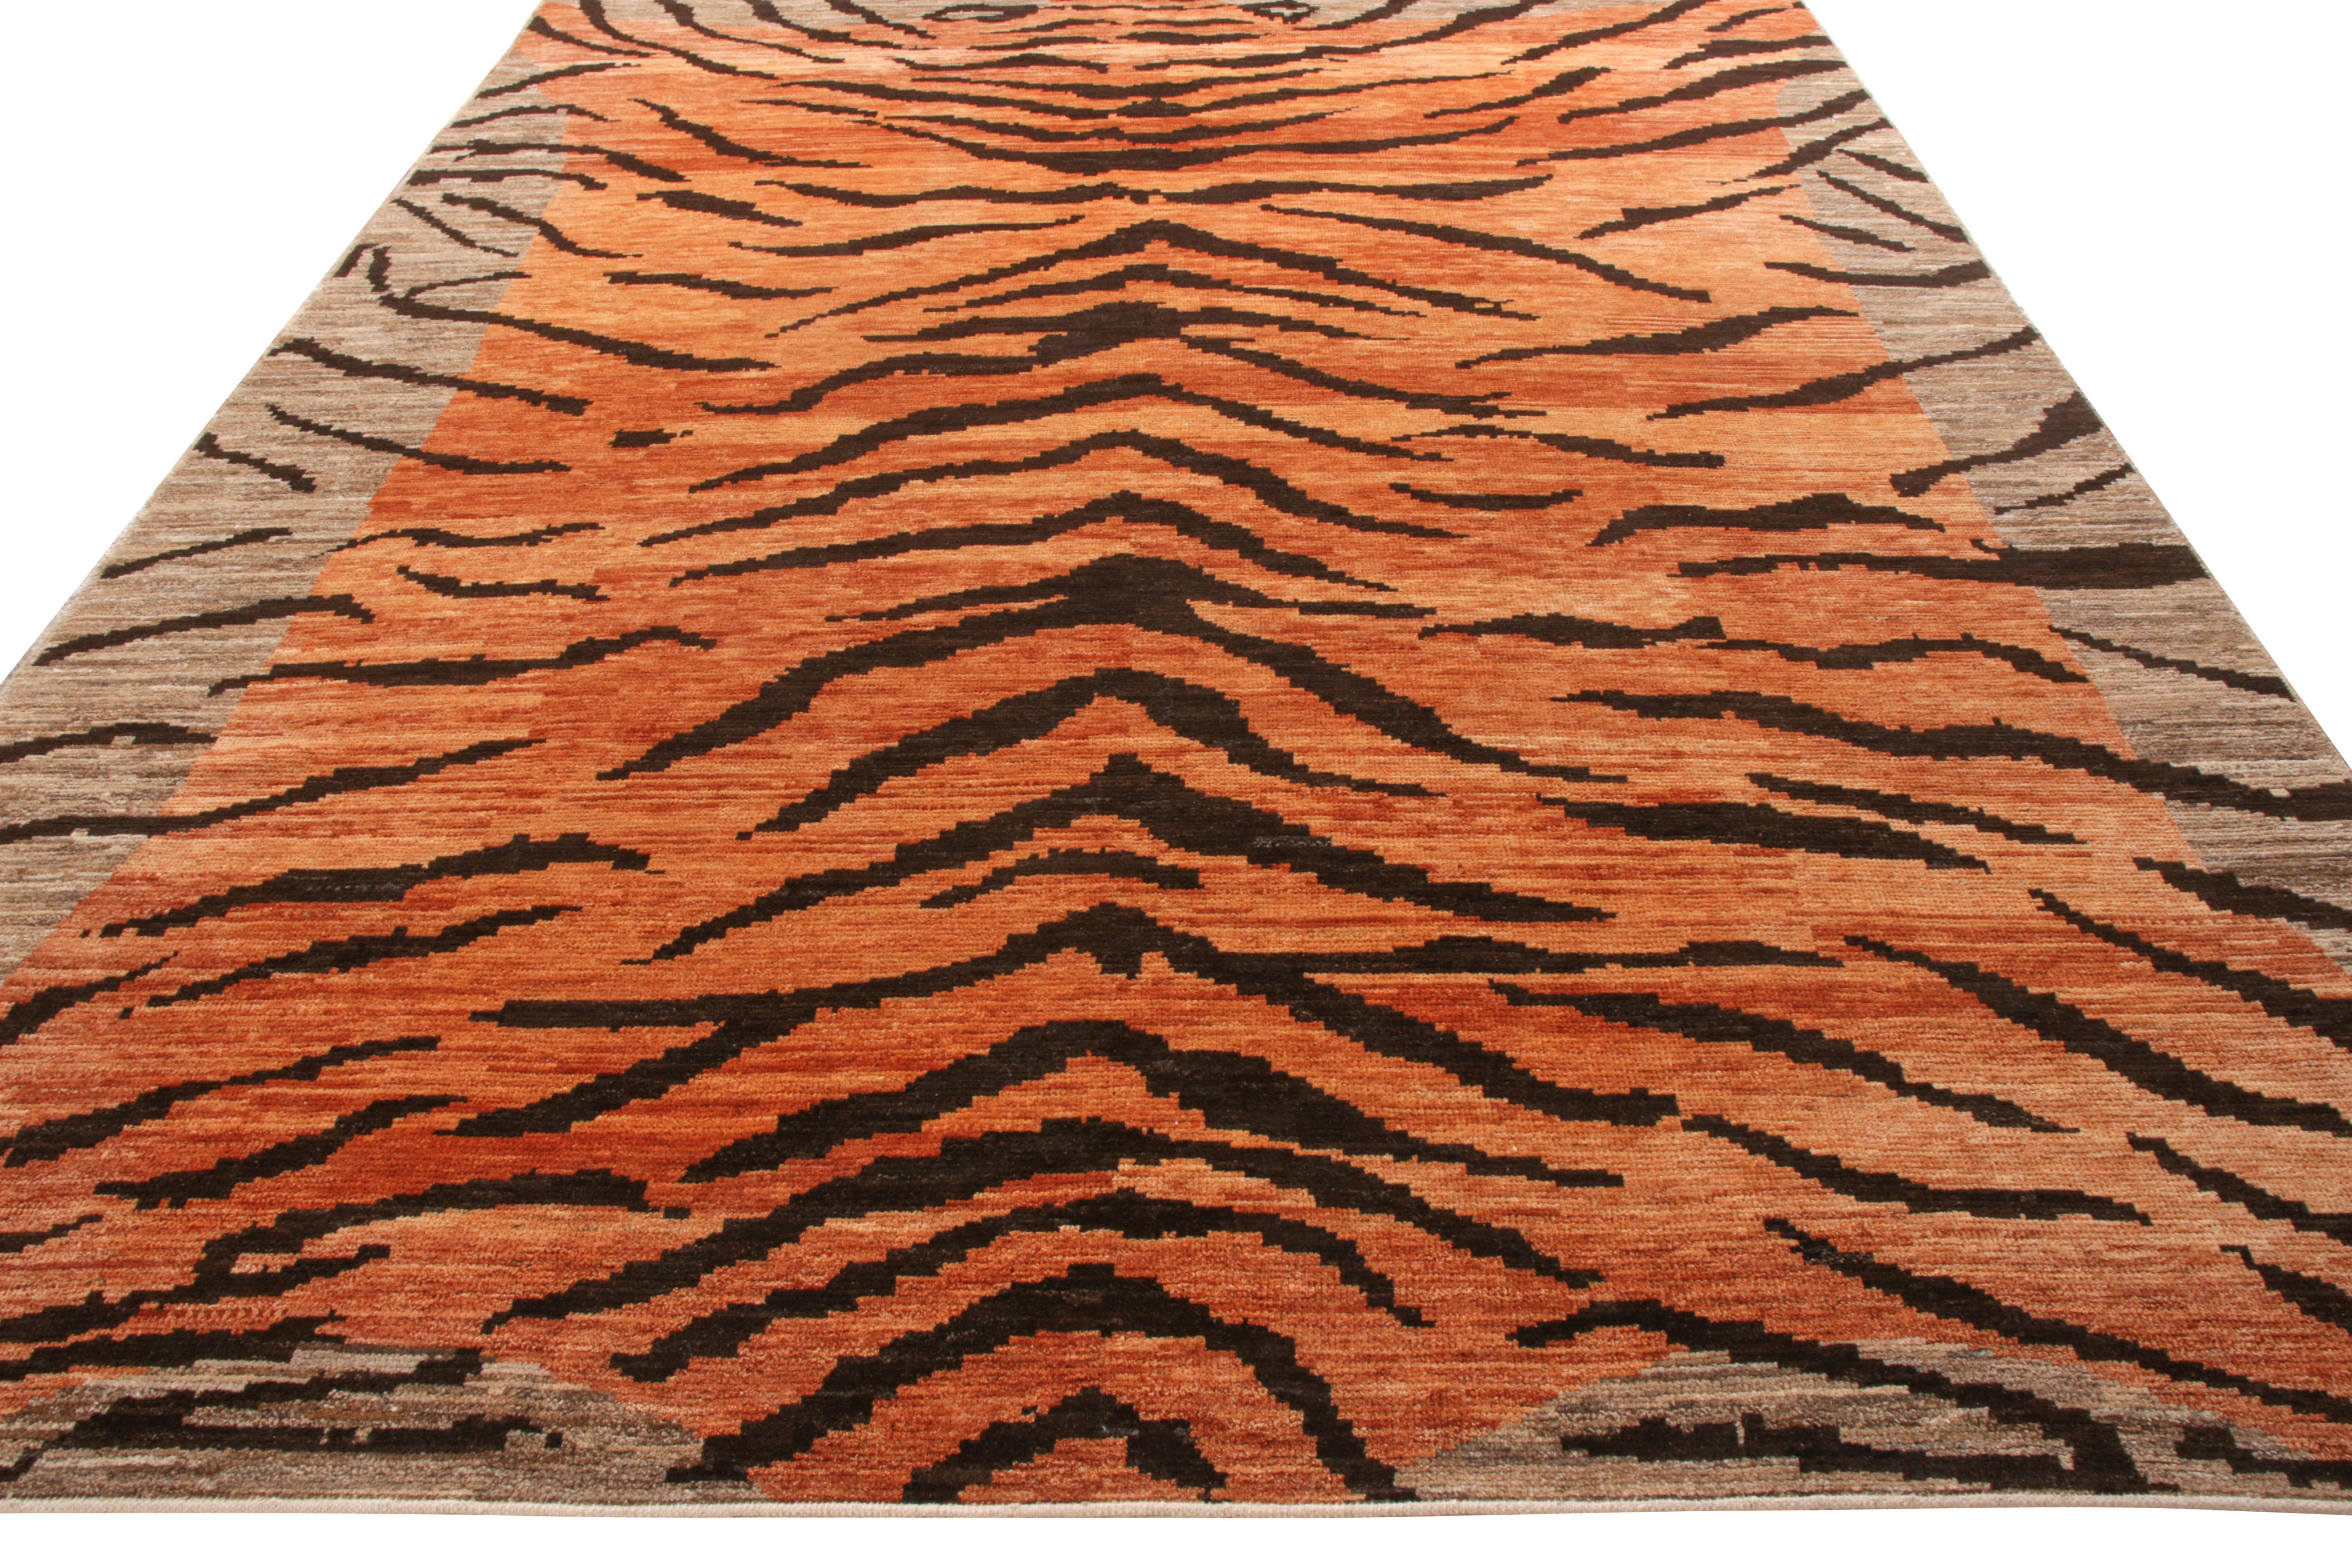 Rug & Kilim presents this 9 x 12 rug from its newly unveiled Tigers Collection. Hand knotted in wool, this rich rug surrounds itself in a commanding aura that is reflected in its pictorial representation of luscious orange and black stripes settling